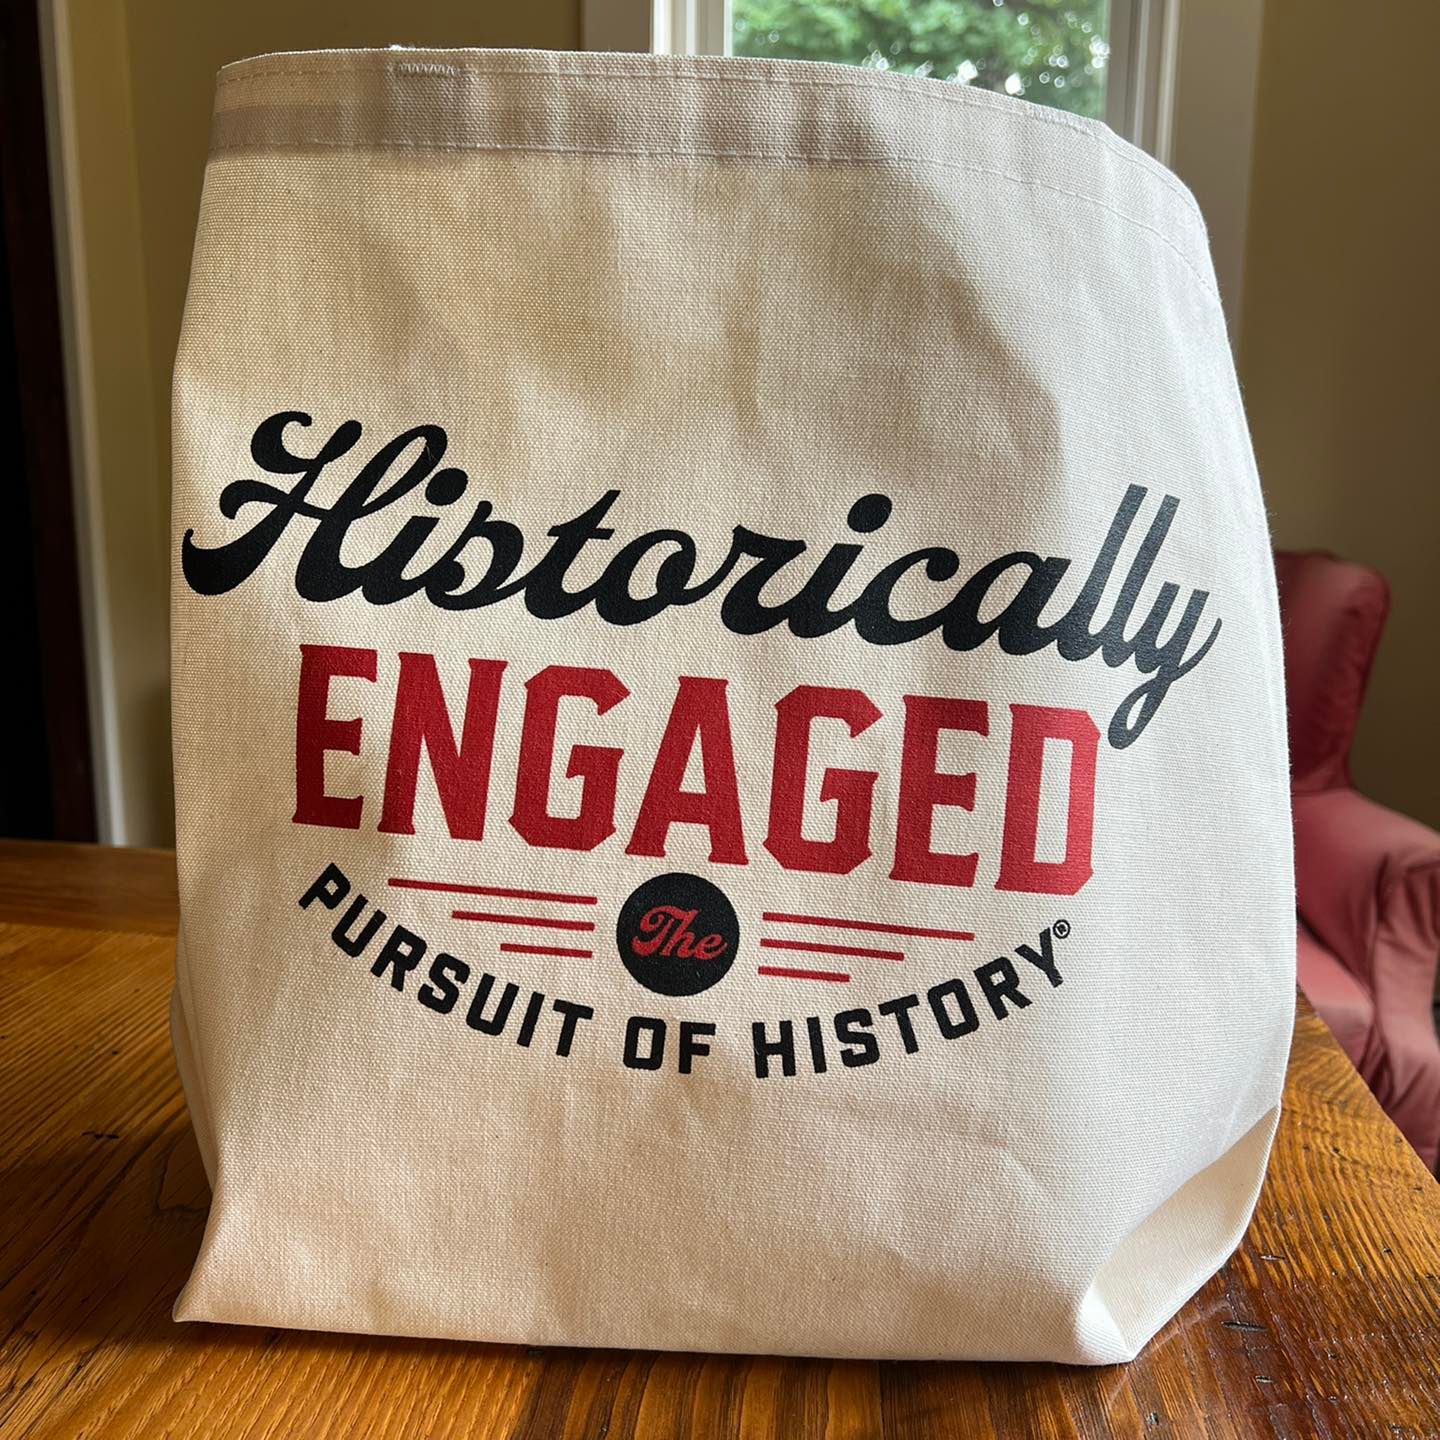 Historically Engaged Tote Bag on tabletop